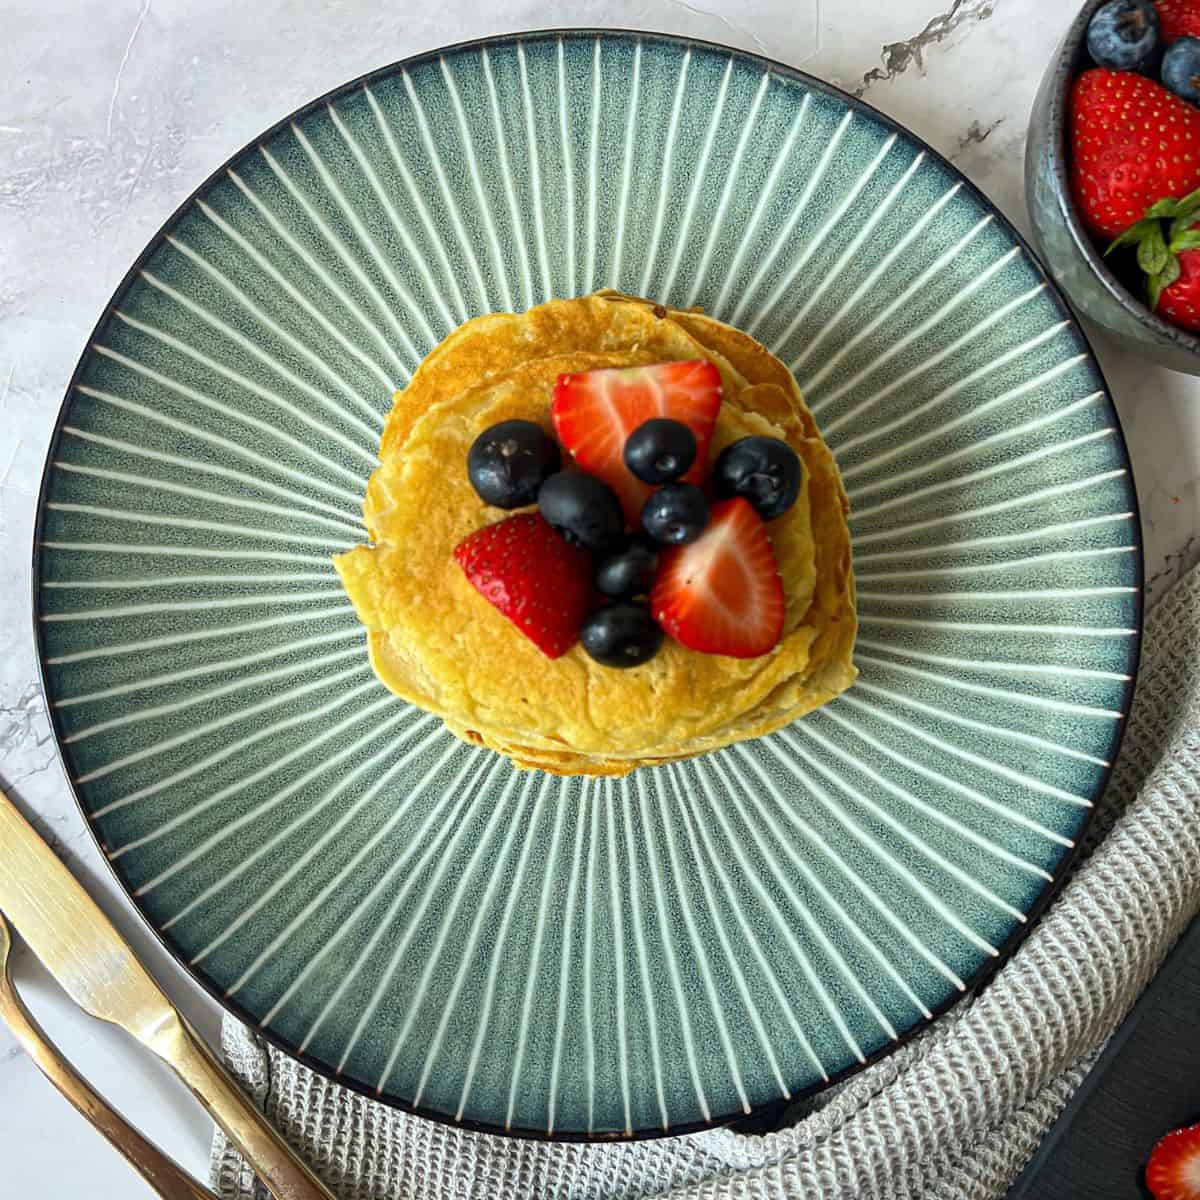 A pile of pancakes on a striped plate, topped with strawberries and blueberries.